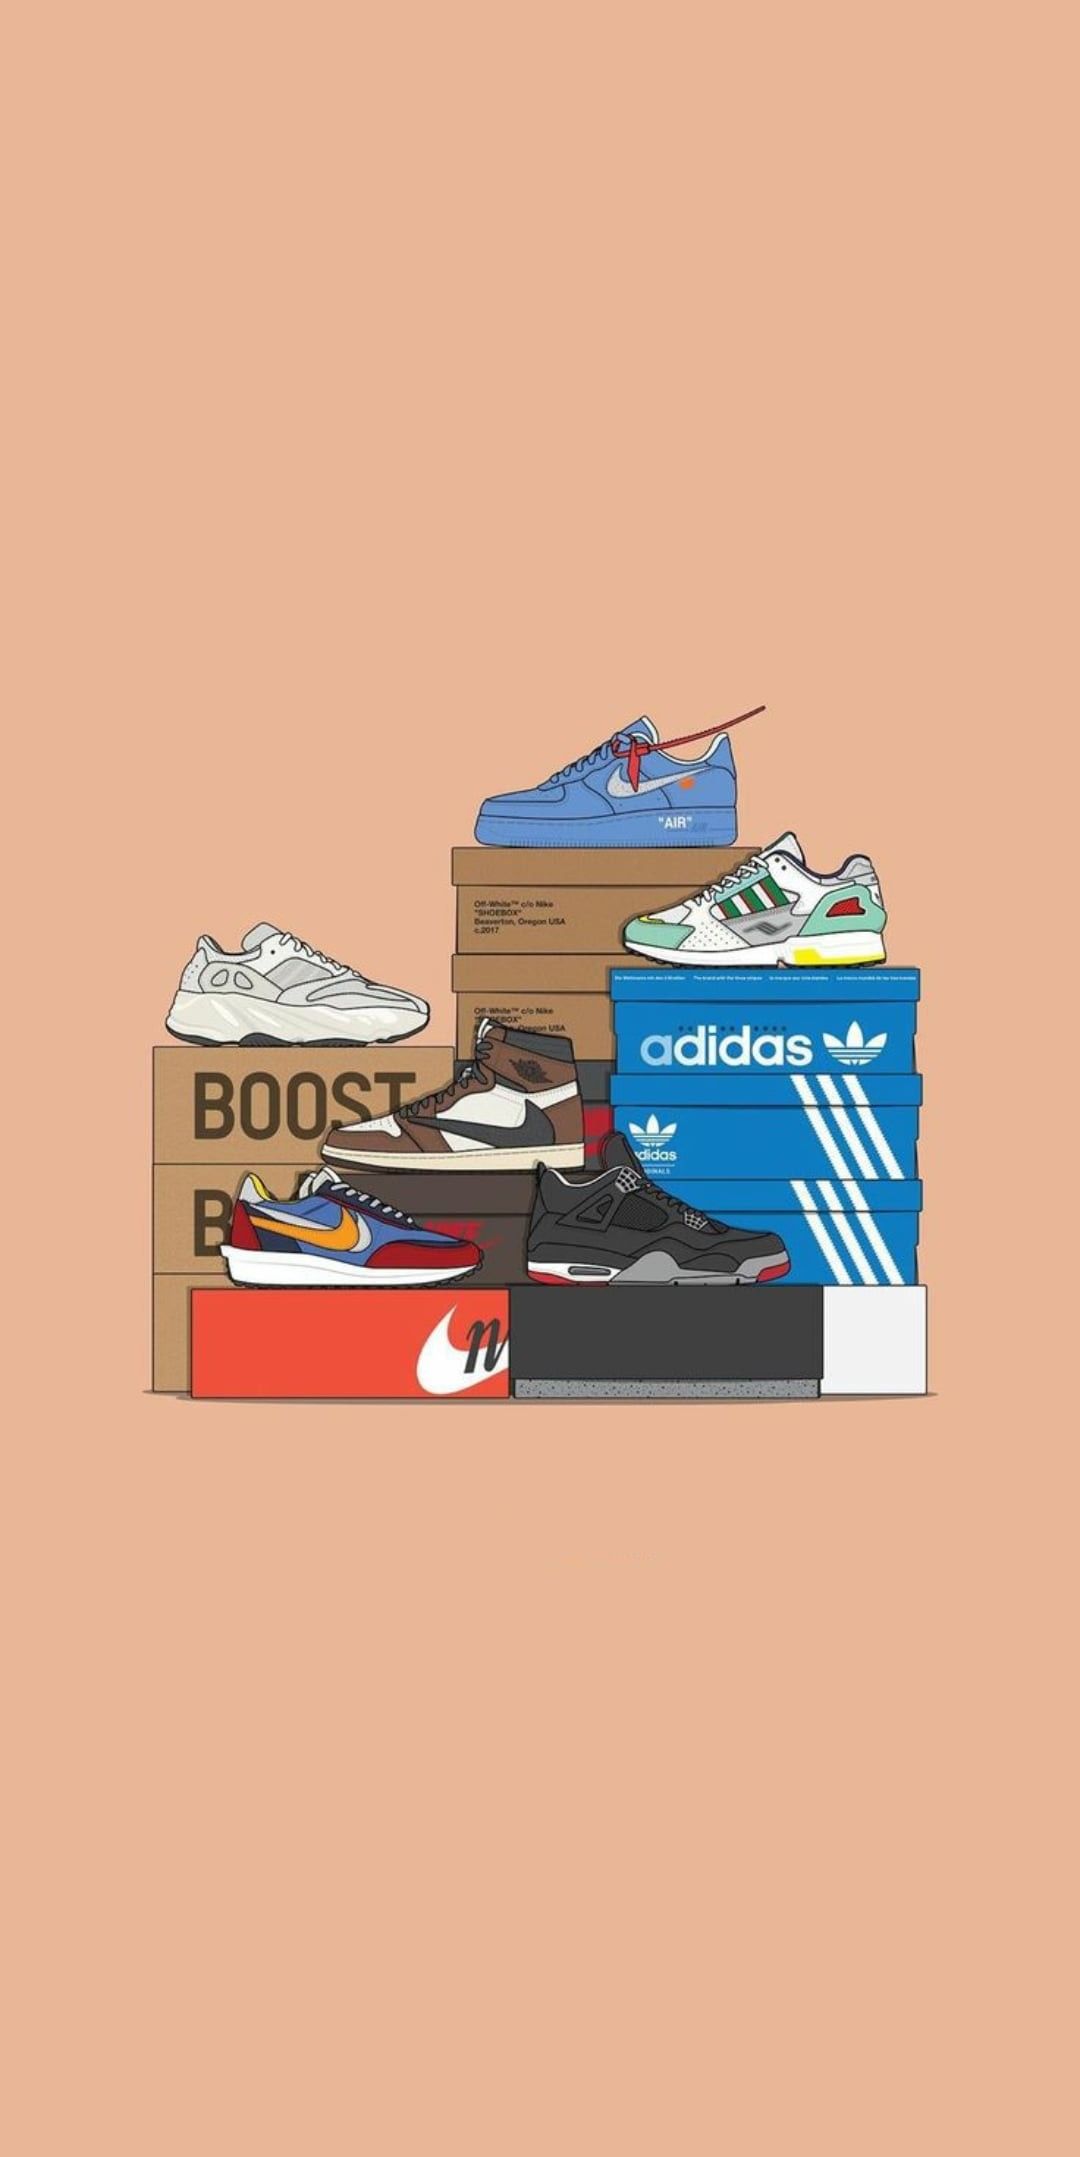 SNKRS Wallpapers  Wallpaper Cave